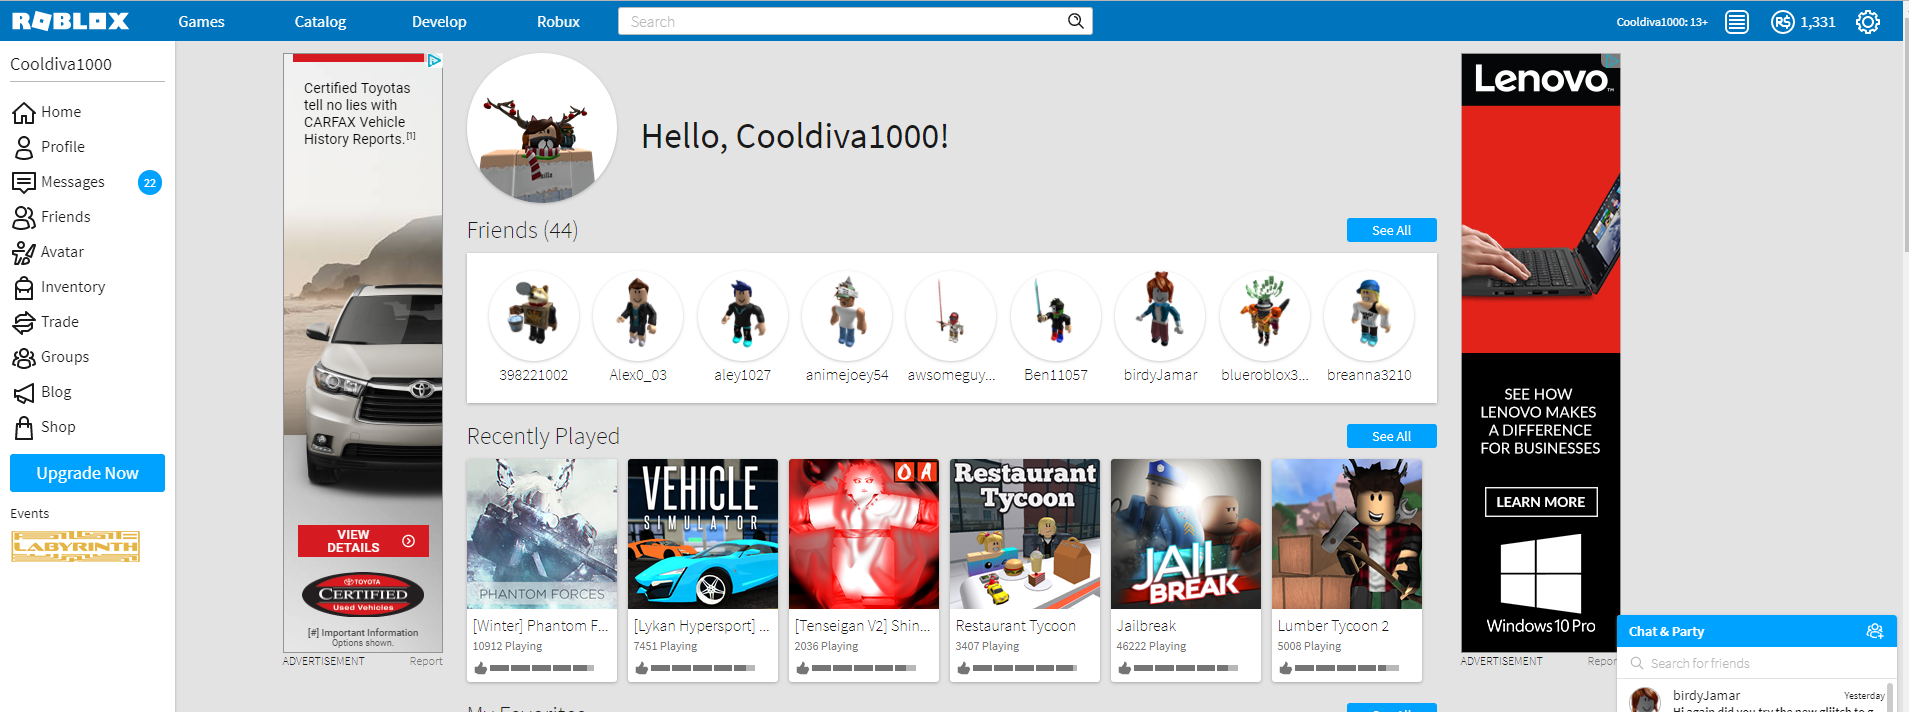 Selling High End 2009 2009 Roblox Female Account Playerup Accounts Marketplace Player 2 Player Secure Platform - how to play roblox 2009 online